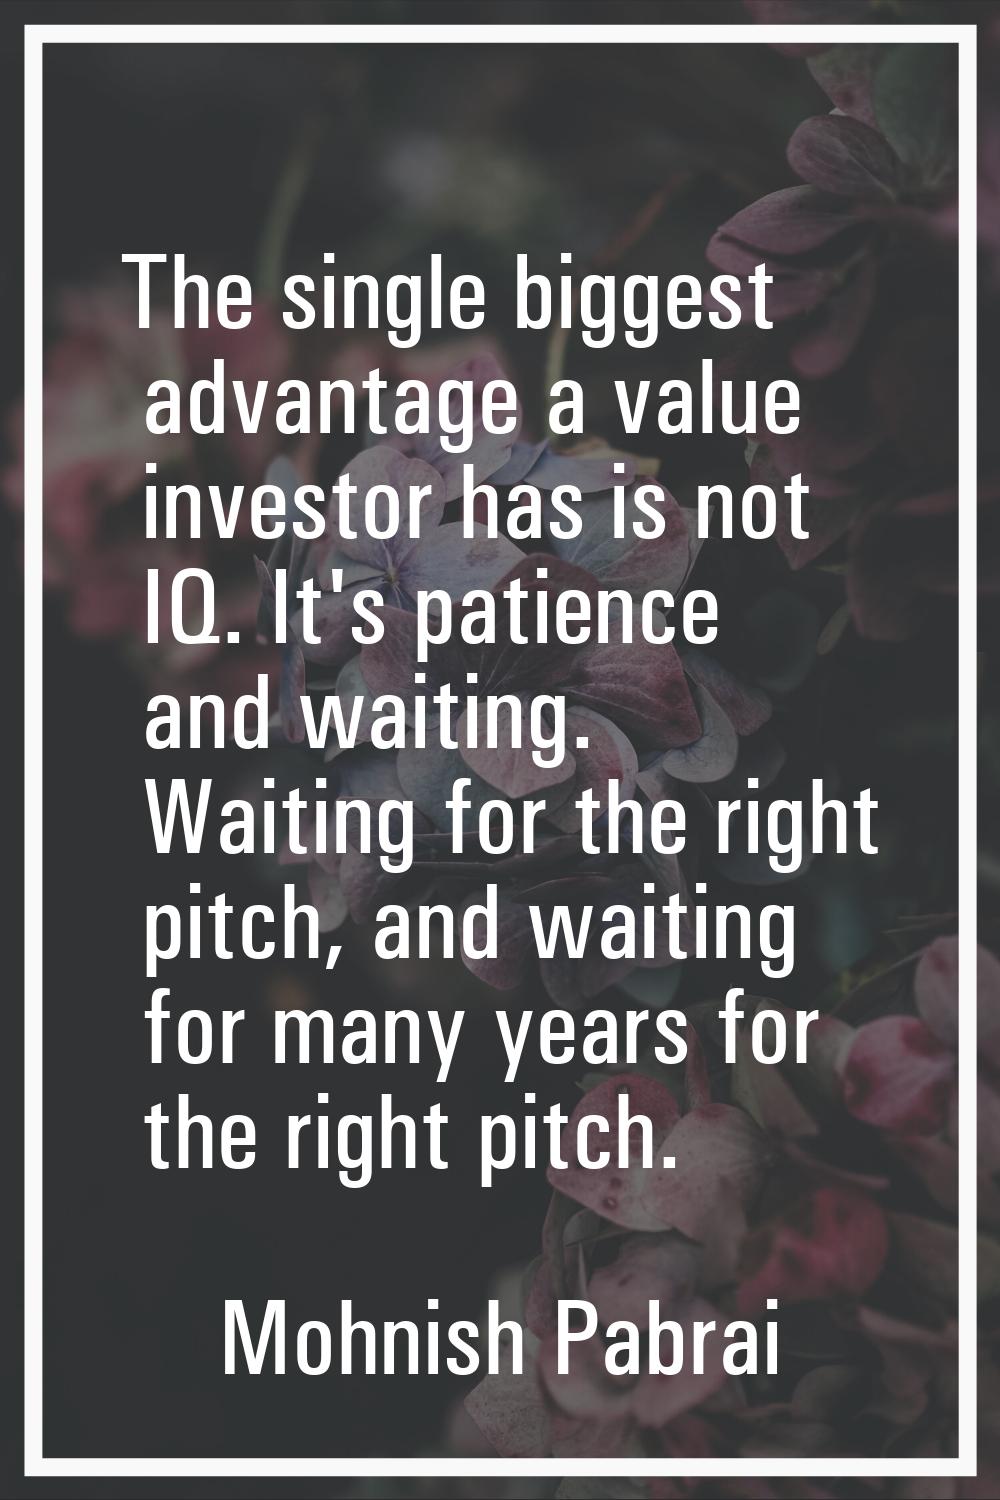 The single biggest advantage a value investor has is not IQ. It's patience and waiting. Waiting for